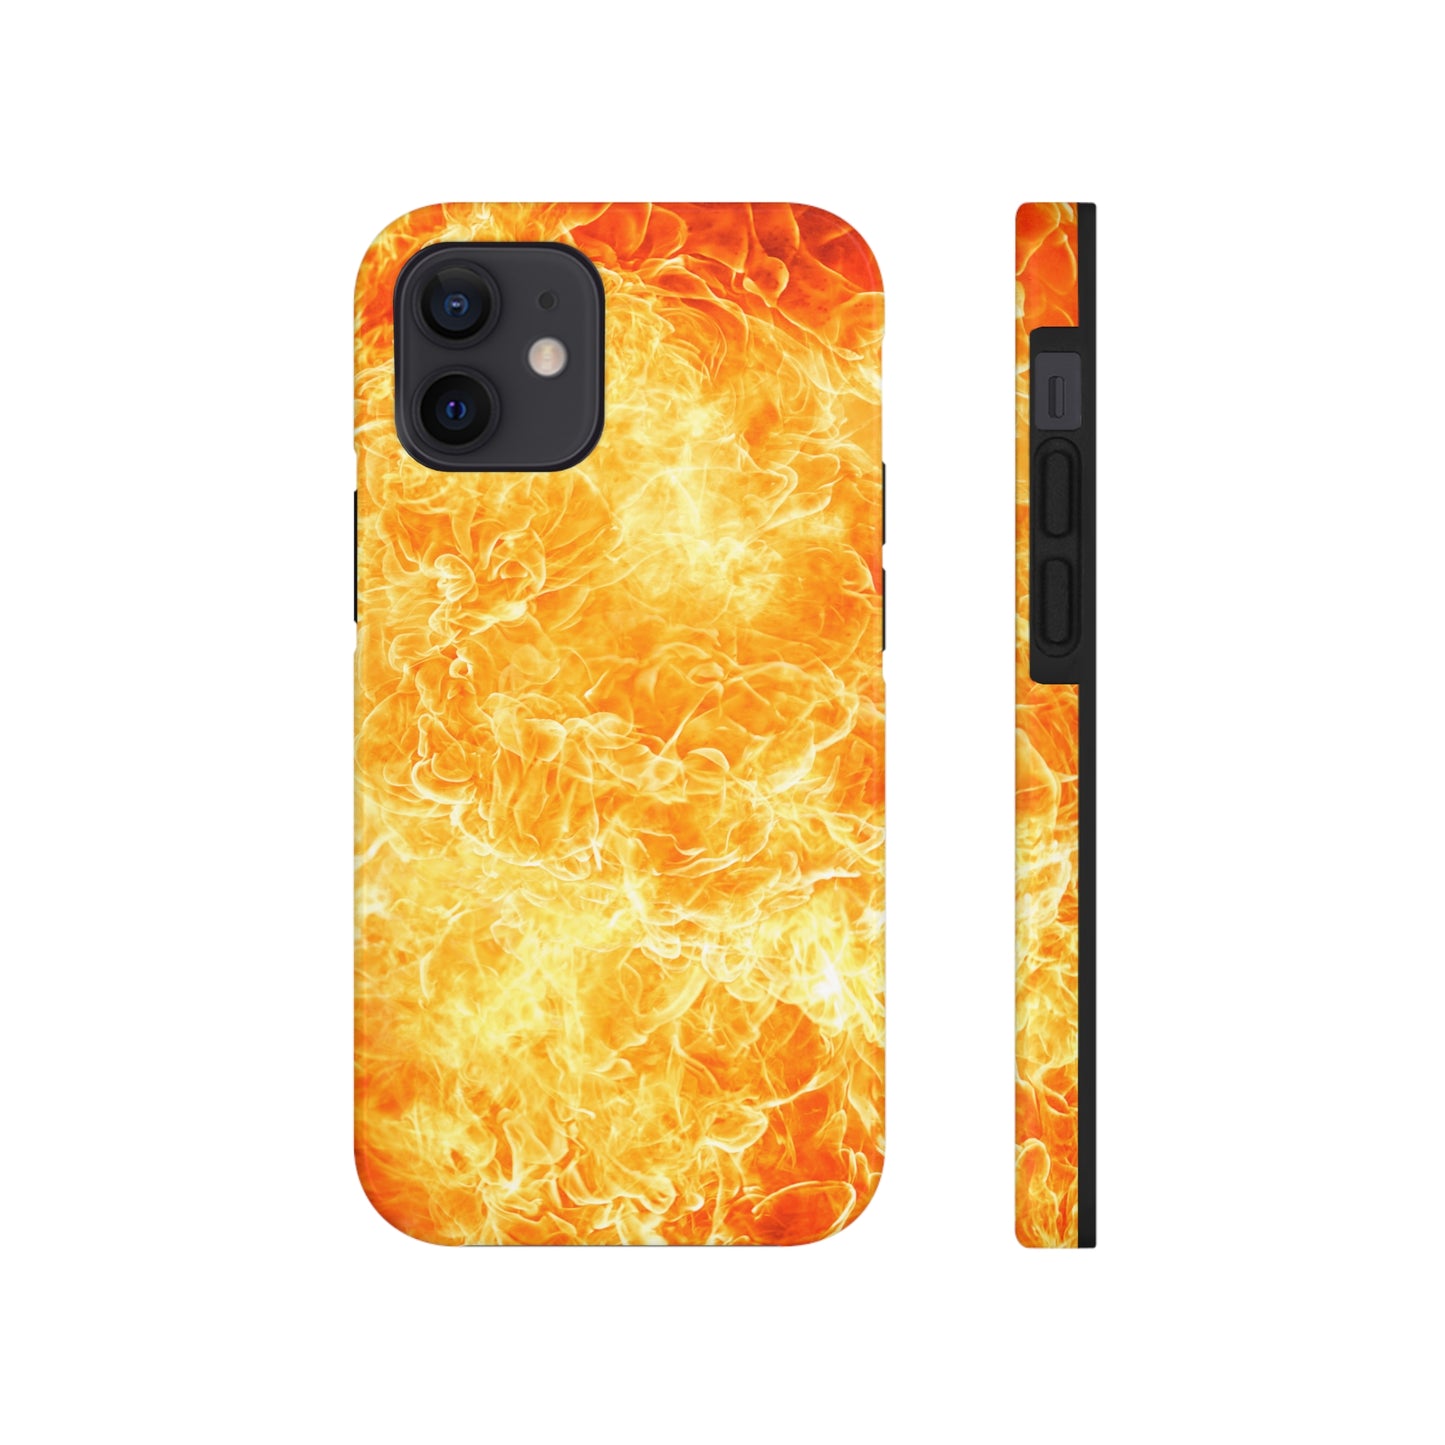 Extreme Racing Fire Graphic Tough Phone Cases